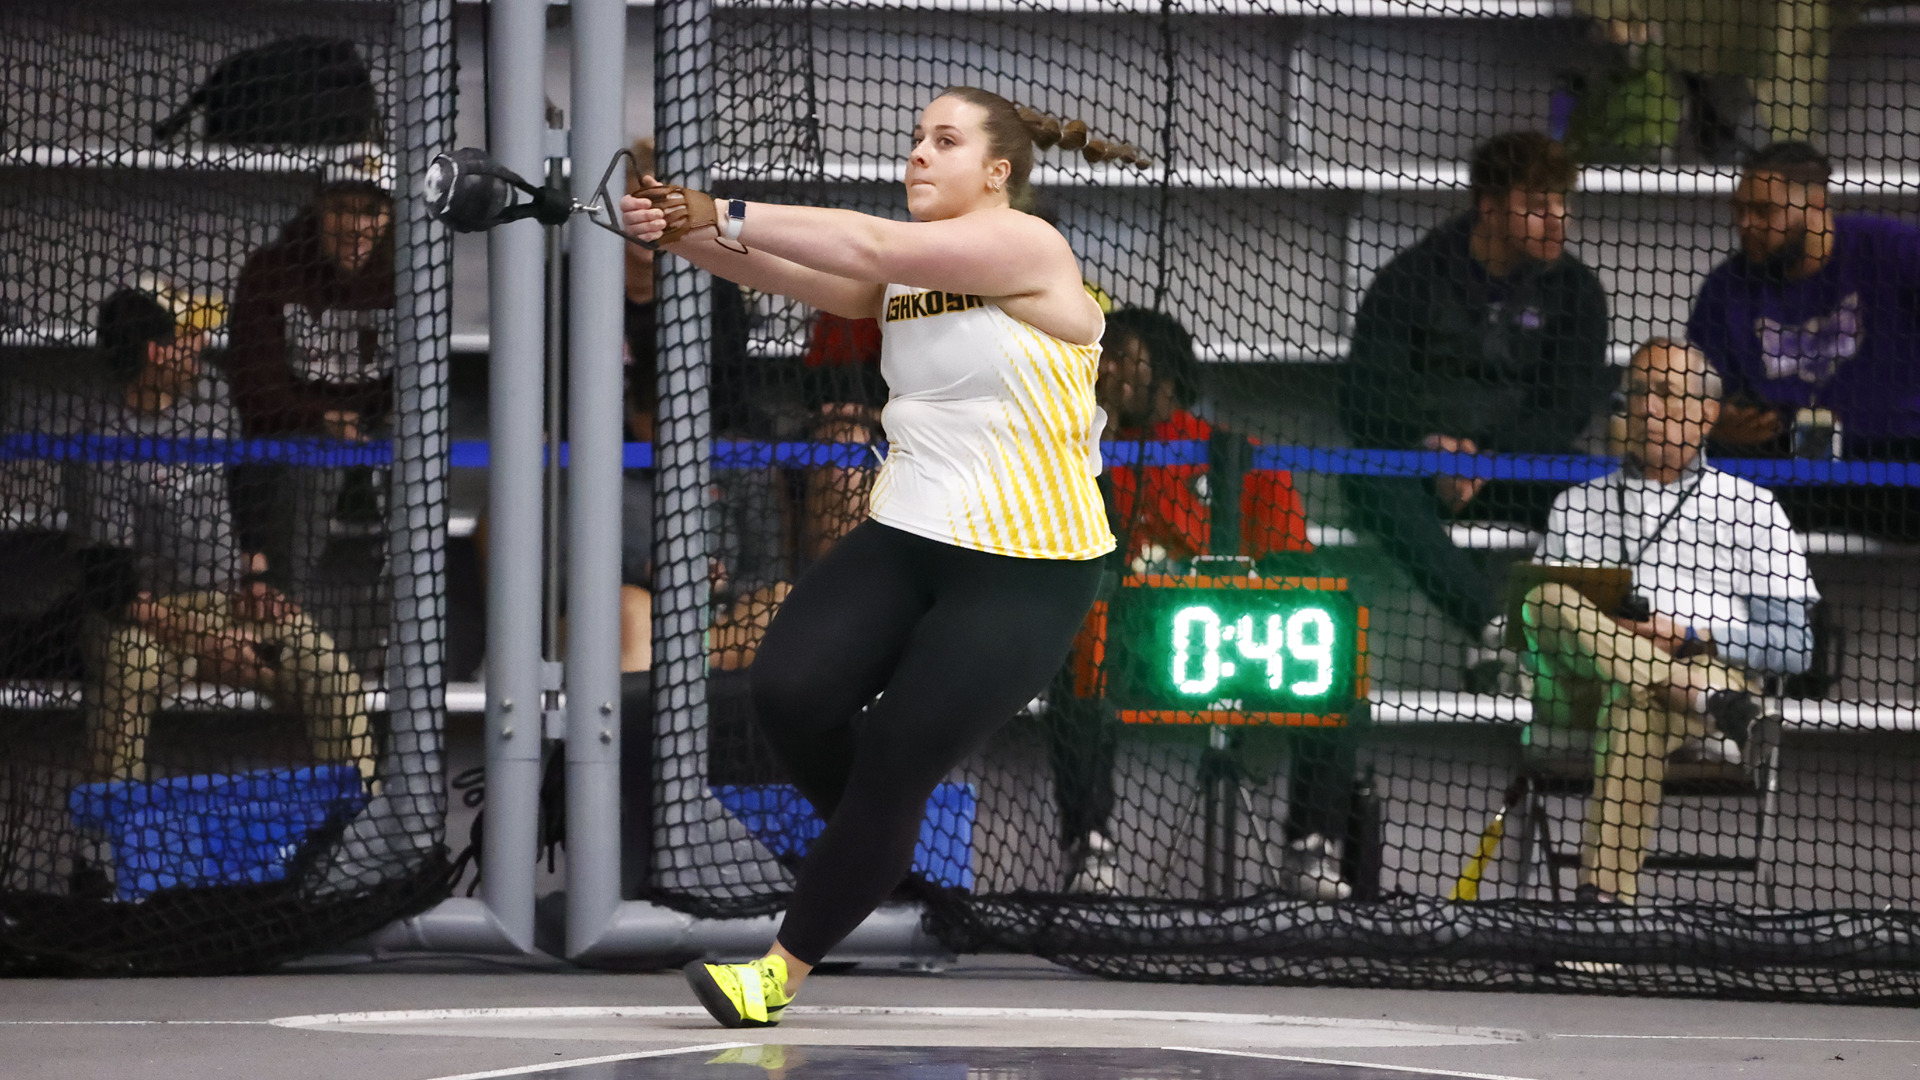 Brenna Masloroff earned her second career All-America nod on the 20-lb. weight throw on Friday. Photo Credit: Keith Lucas, Sideline Media Productions